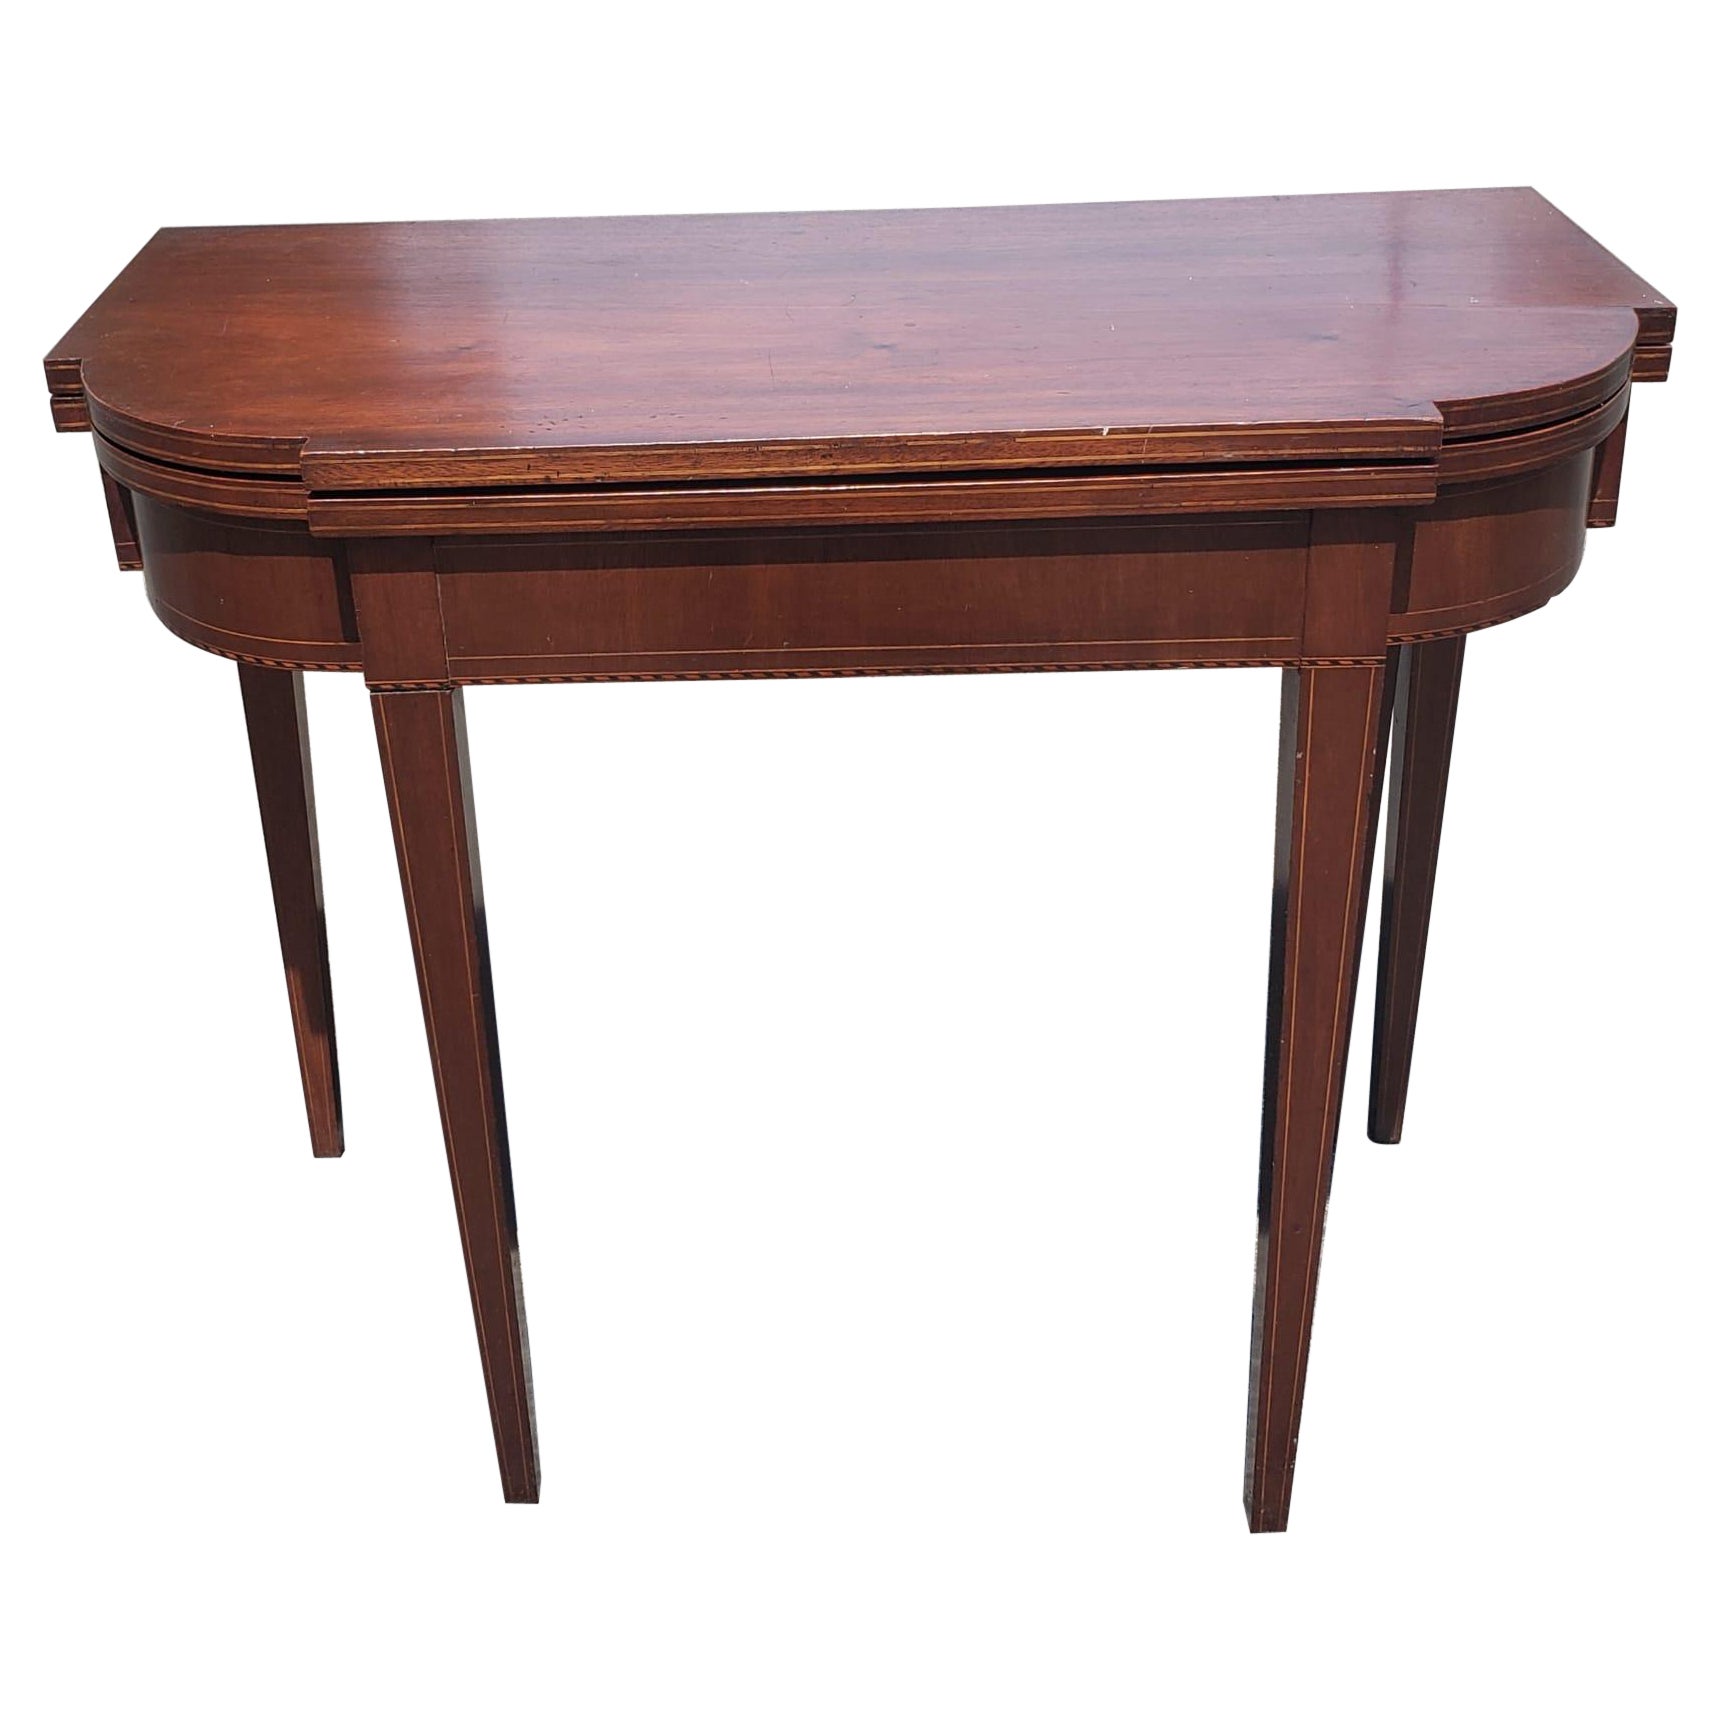 Federal Style Inlaid Mahogany Fold-Top Console Table, Circa 1920s For Sale